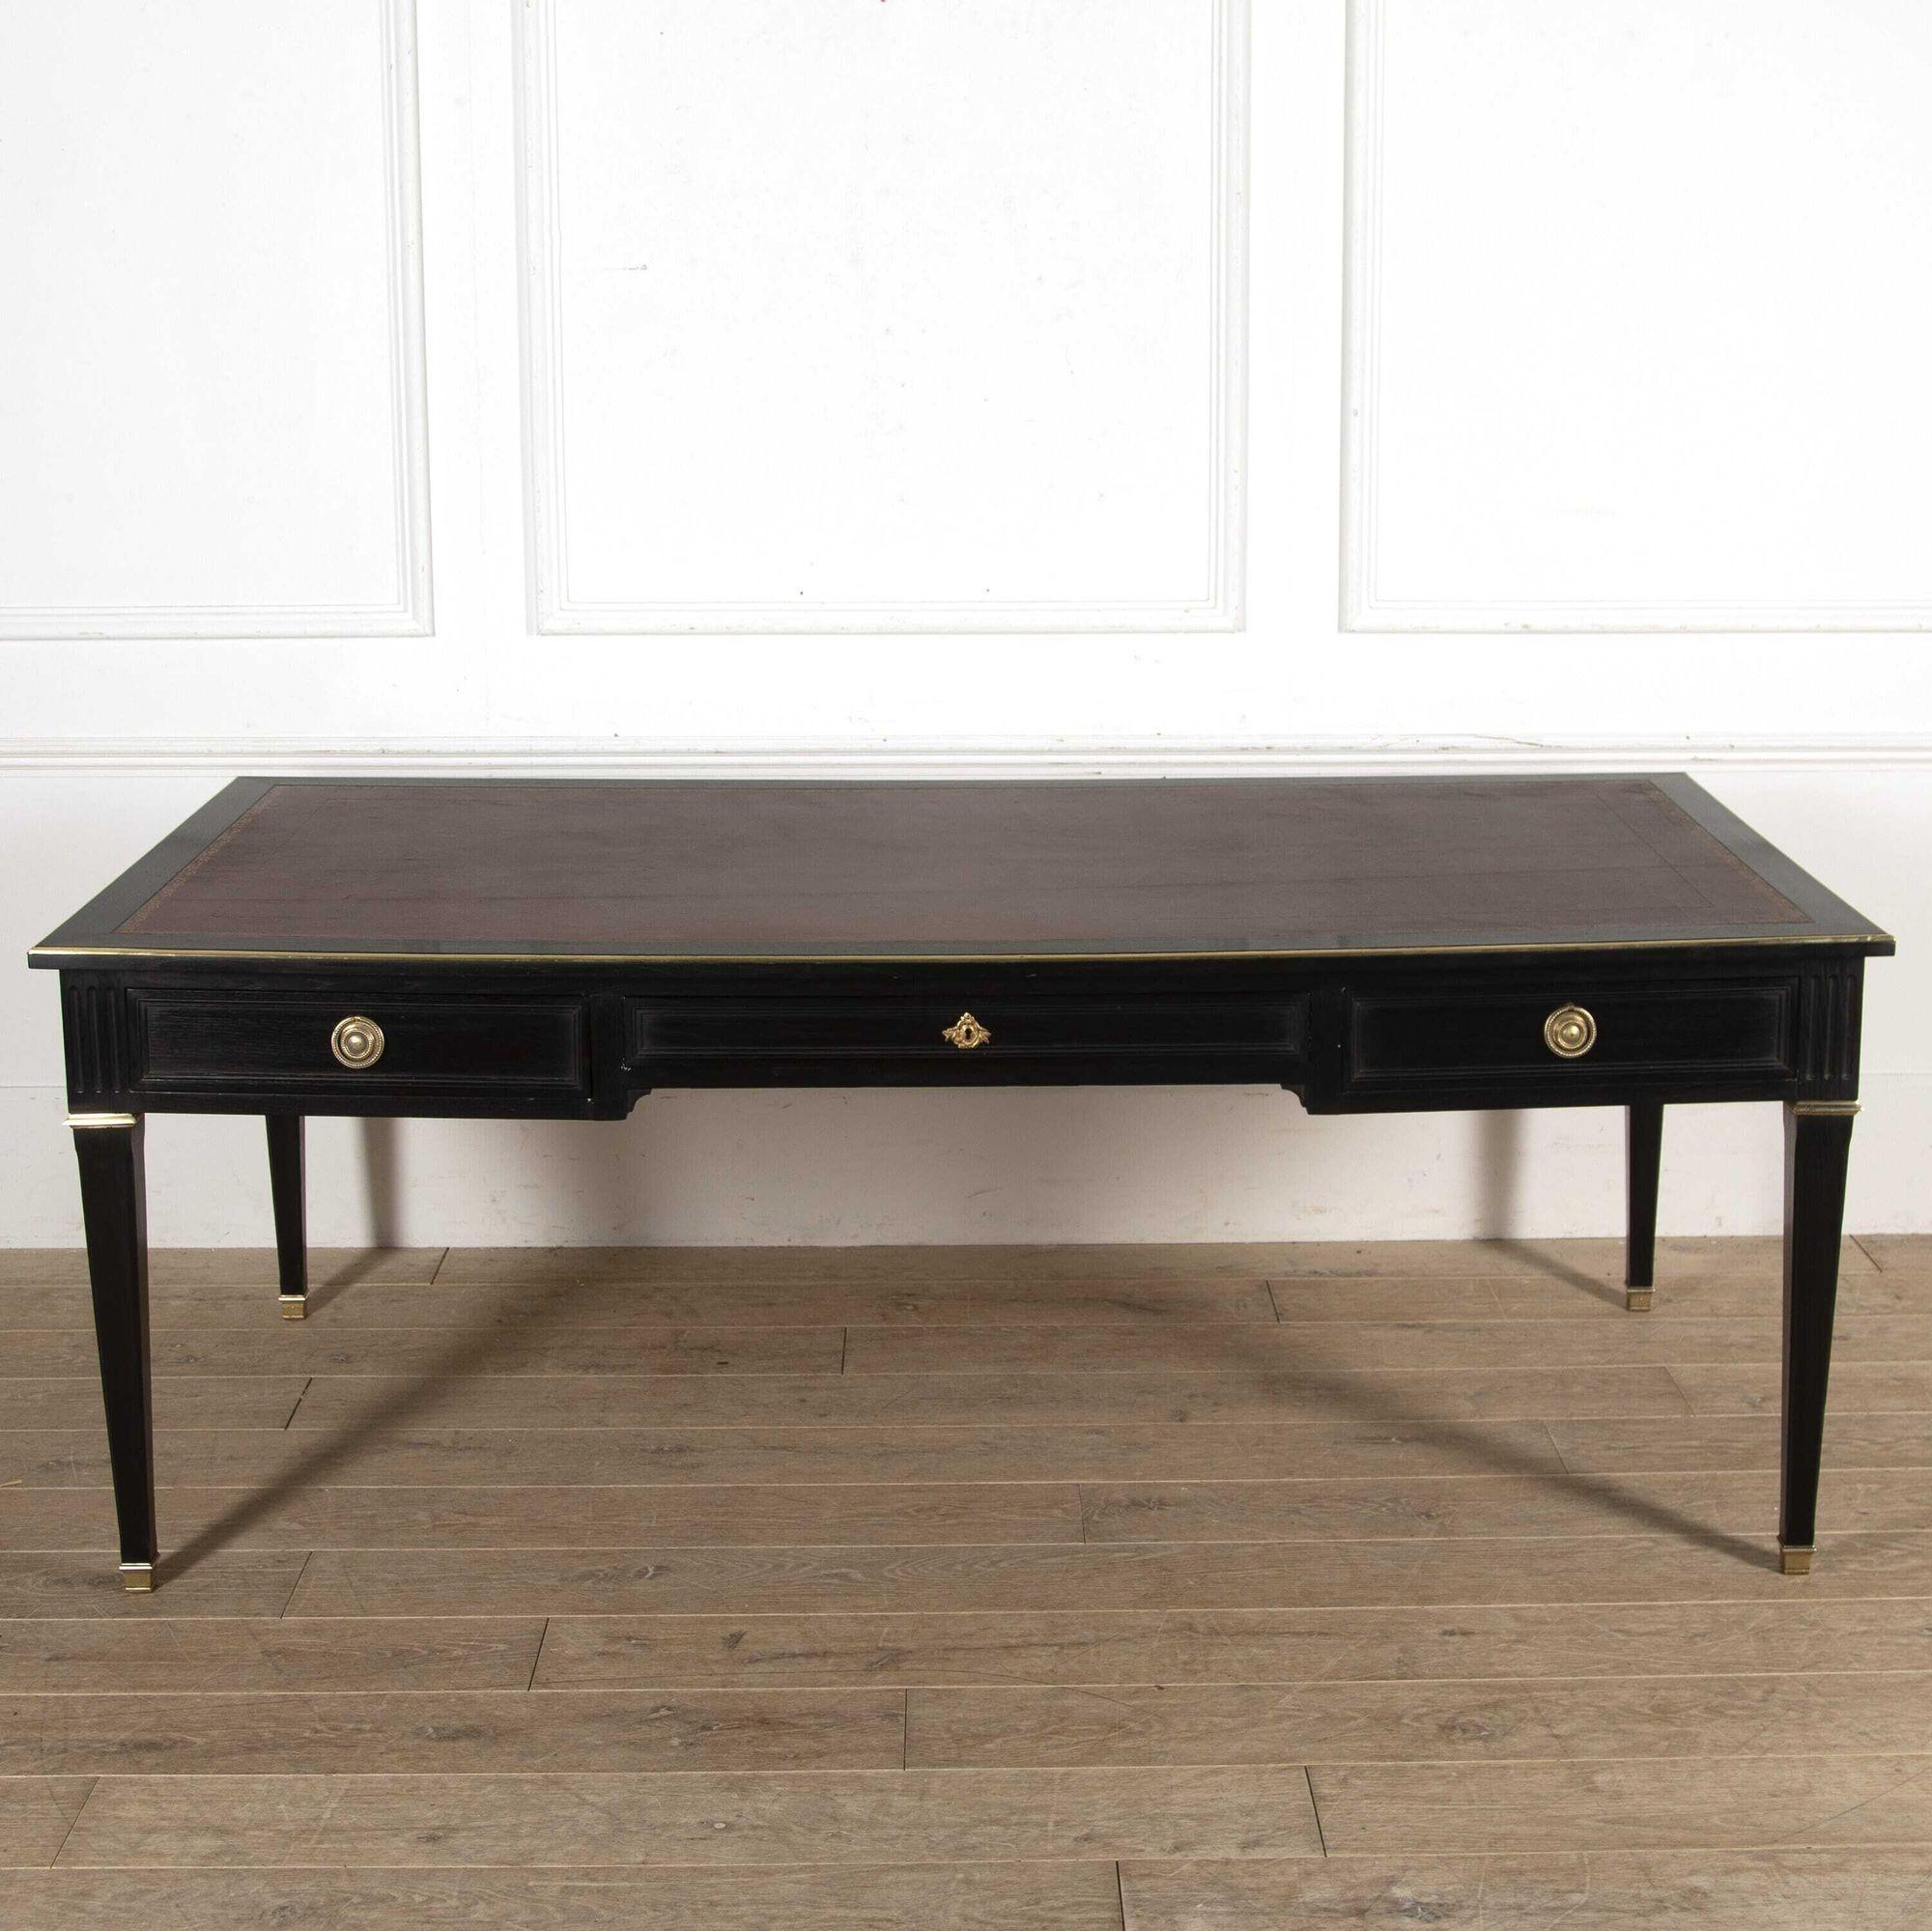 Very smart French Empire ebonised desk.
 
This desk retains its original worn rouge leather inset top. 
 
To the frieze, a long central drawer is flanked by two shorter drawers. 
 
This desk rests on column-style legs and is perfect for a home